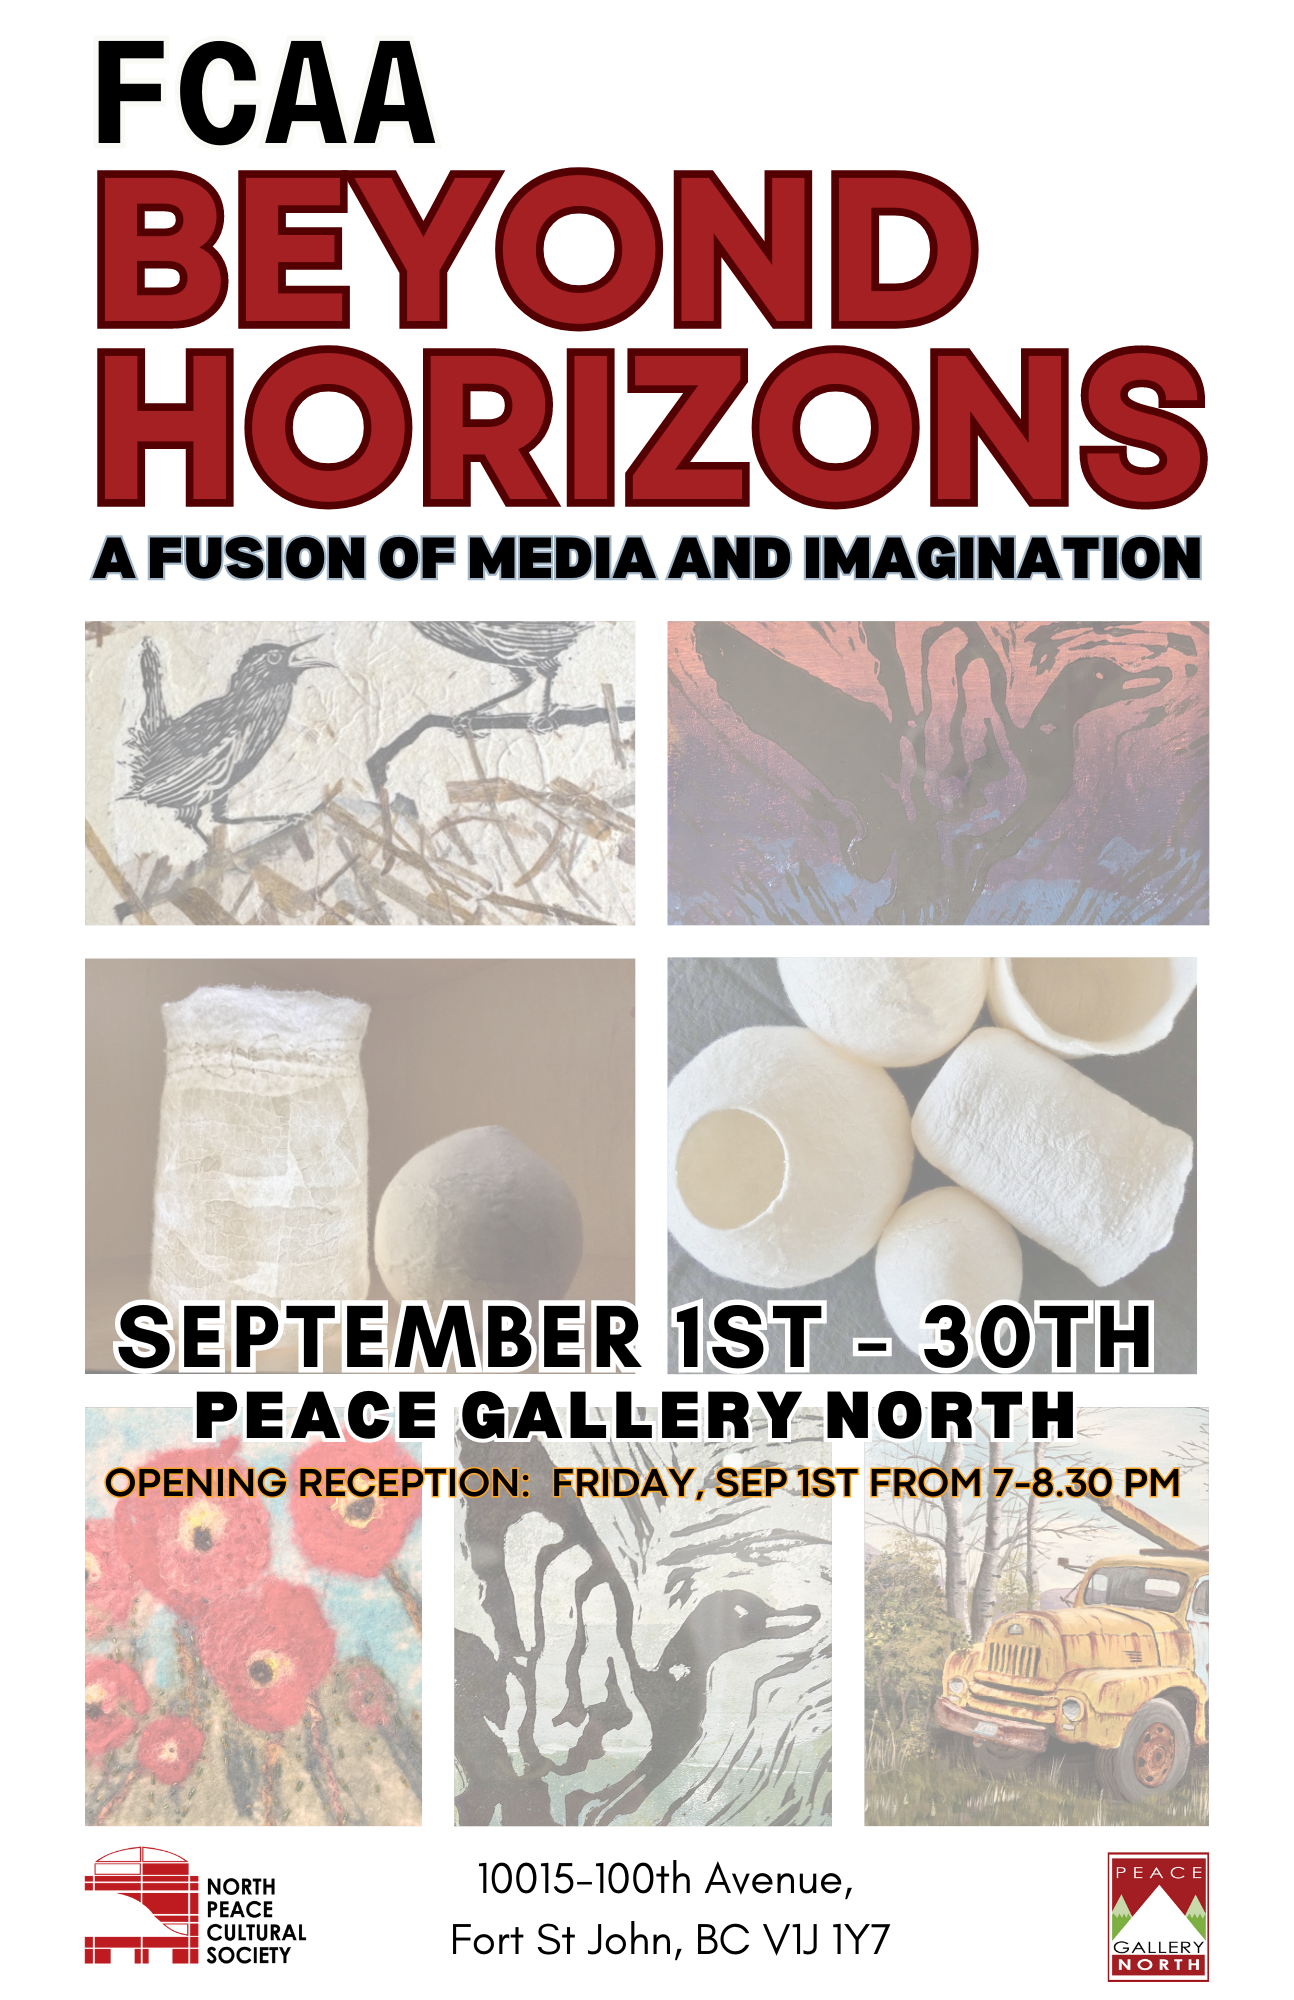 “Beyond Horizons: A Fusion Of Media And Imagination”.